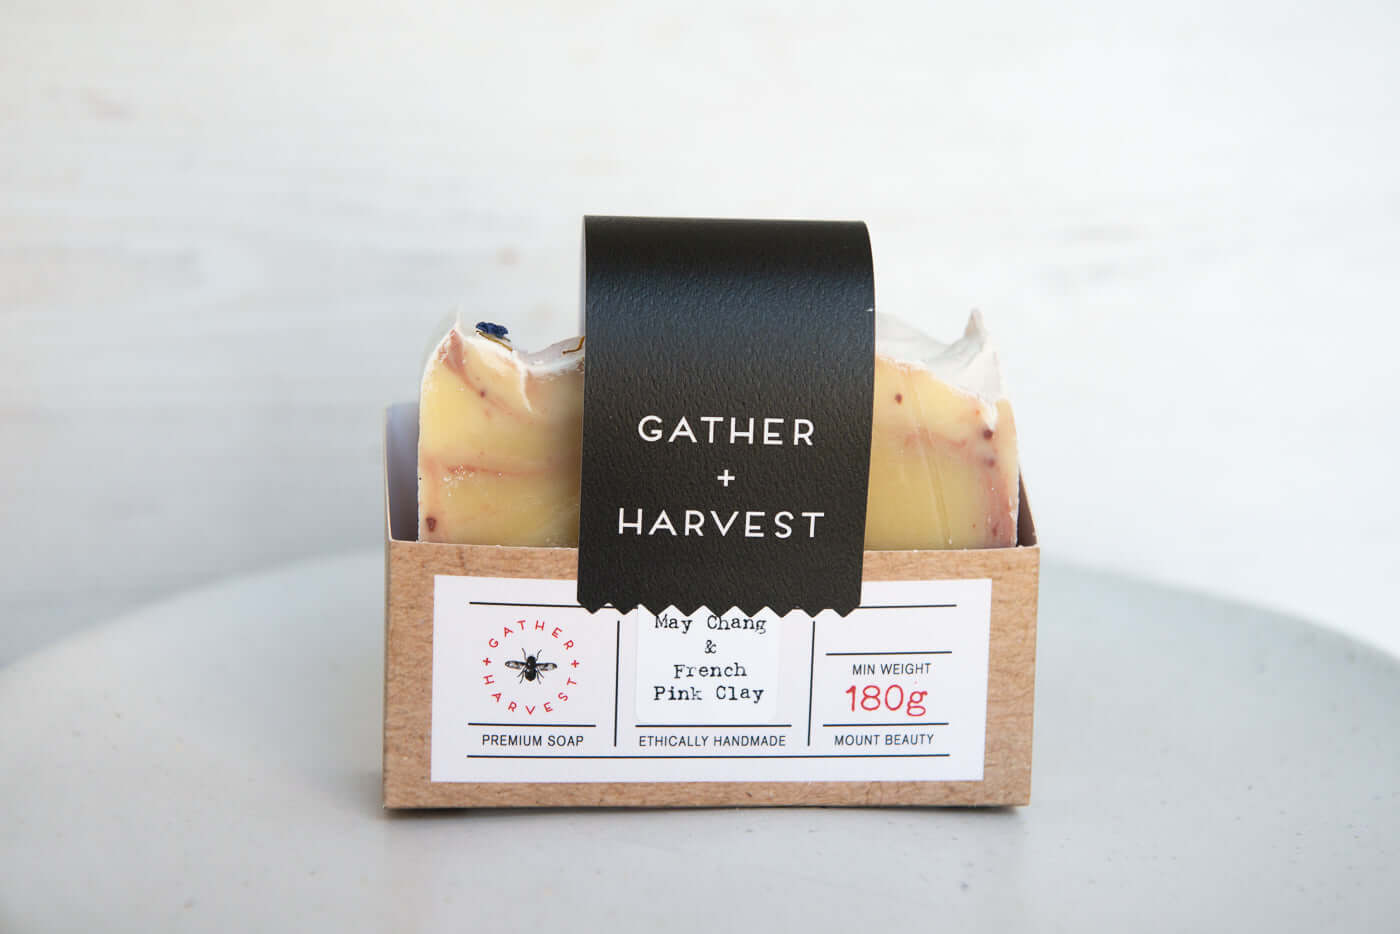 Natural Soap | Handmade in Australia | Gather + Harvest | May Chang and French Pink Clay | Buy online